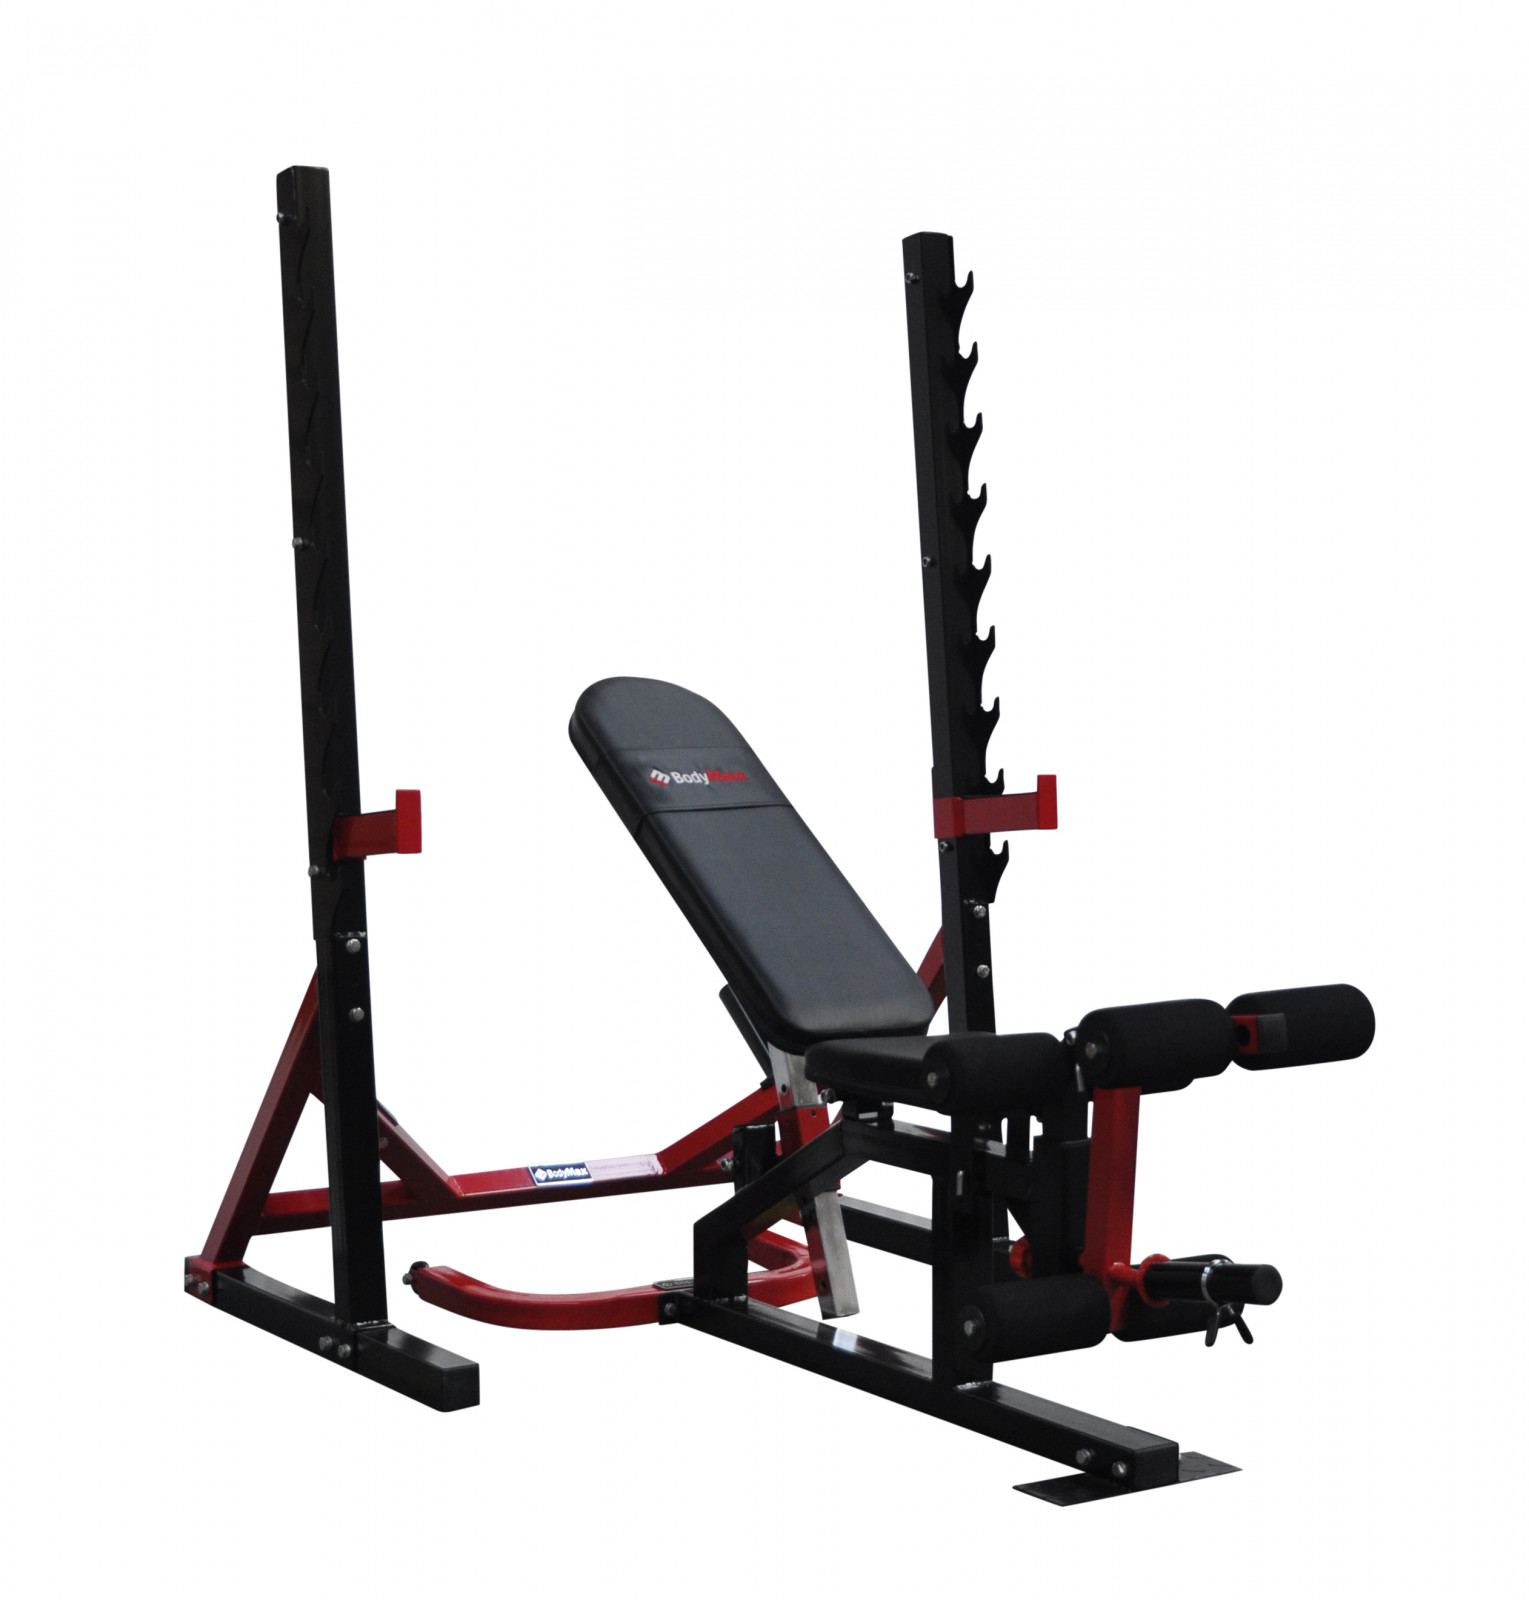 Adjustable Chest Support Power Rack Attachment - Fits Most Power Racks with  5/8 & 1 Holes - Weight Bench Press Rack & Chest Press Machine